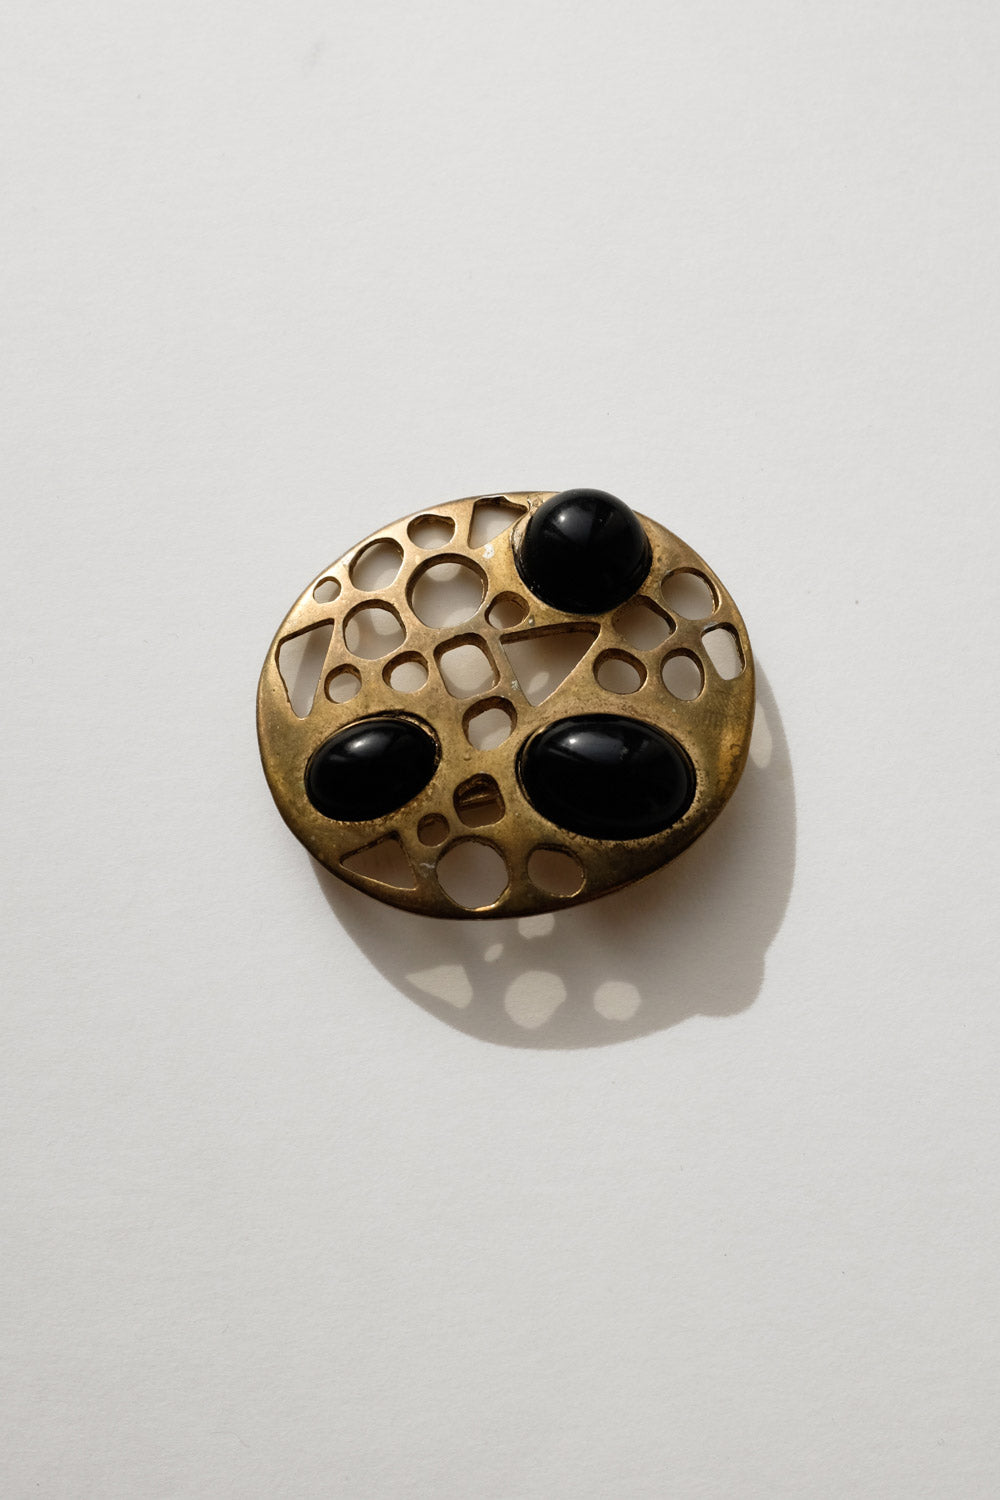 0066_ROUND VINTAGE GOLD BROOCH WITH BLACK STONES